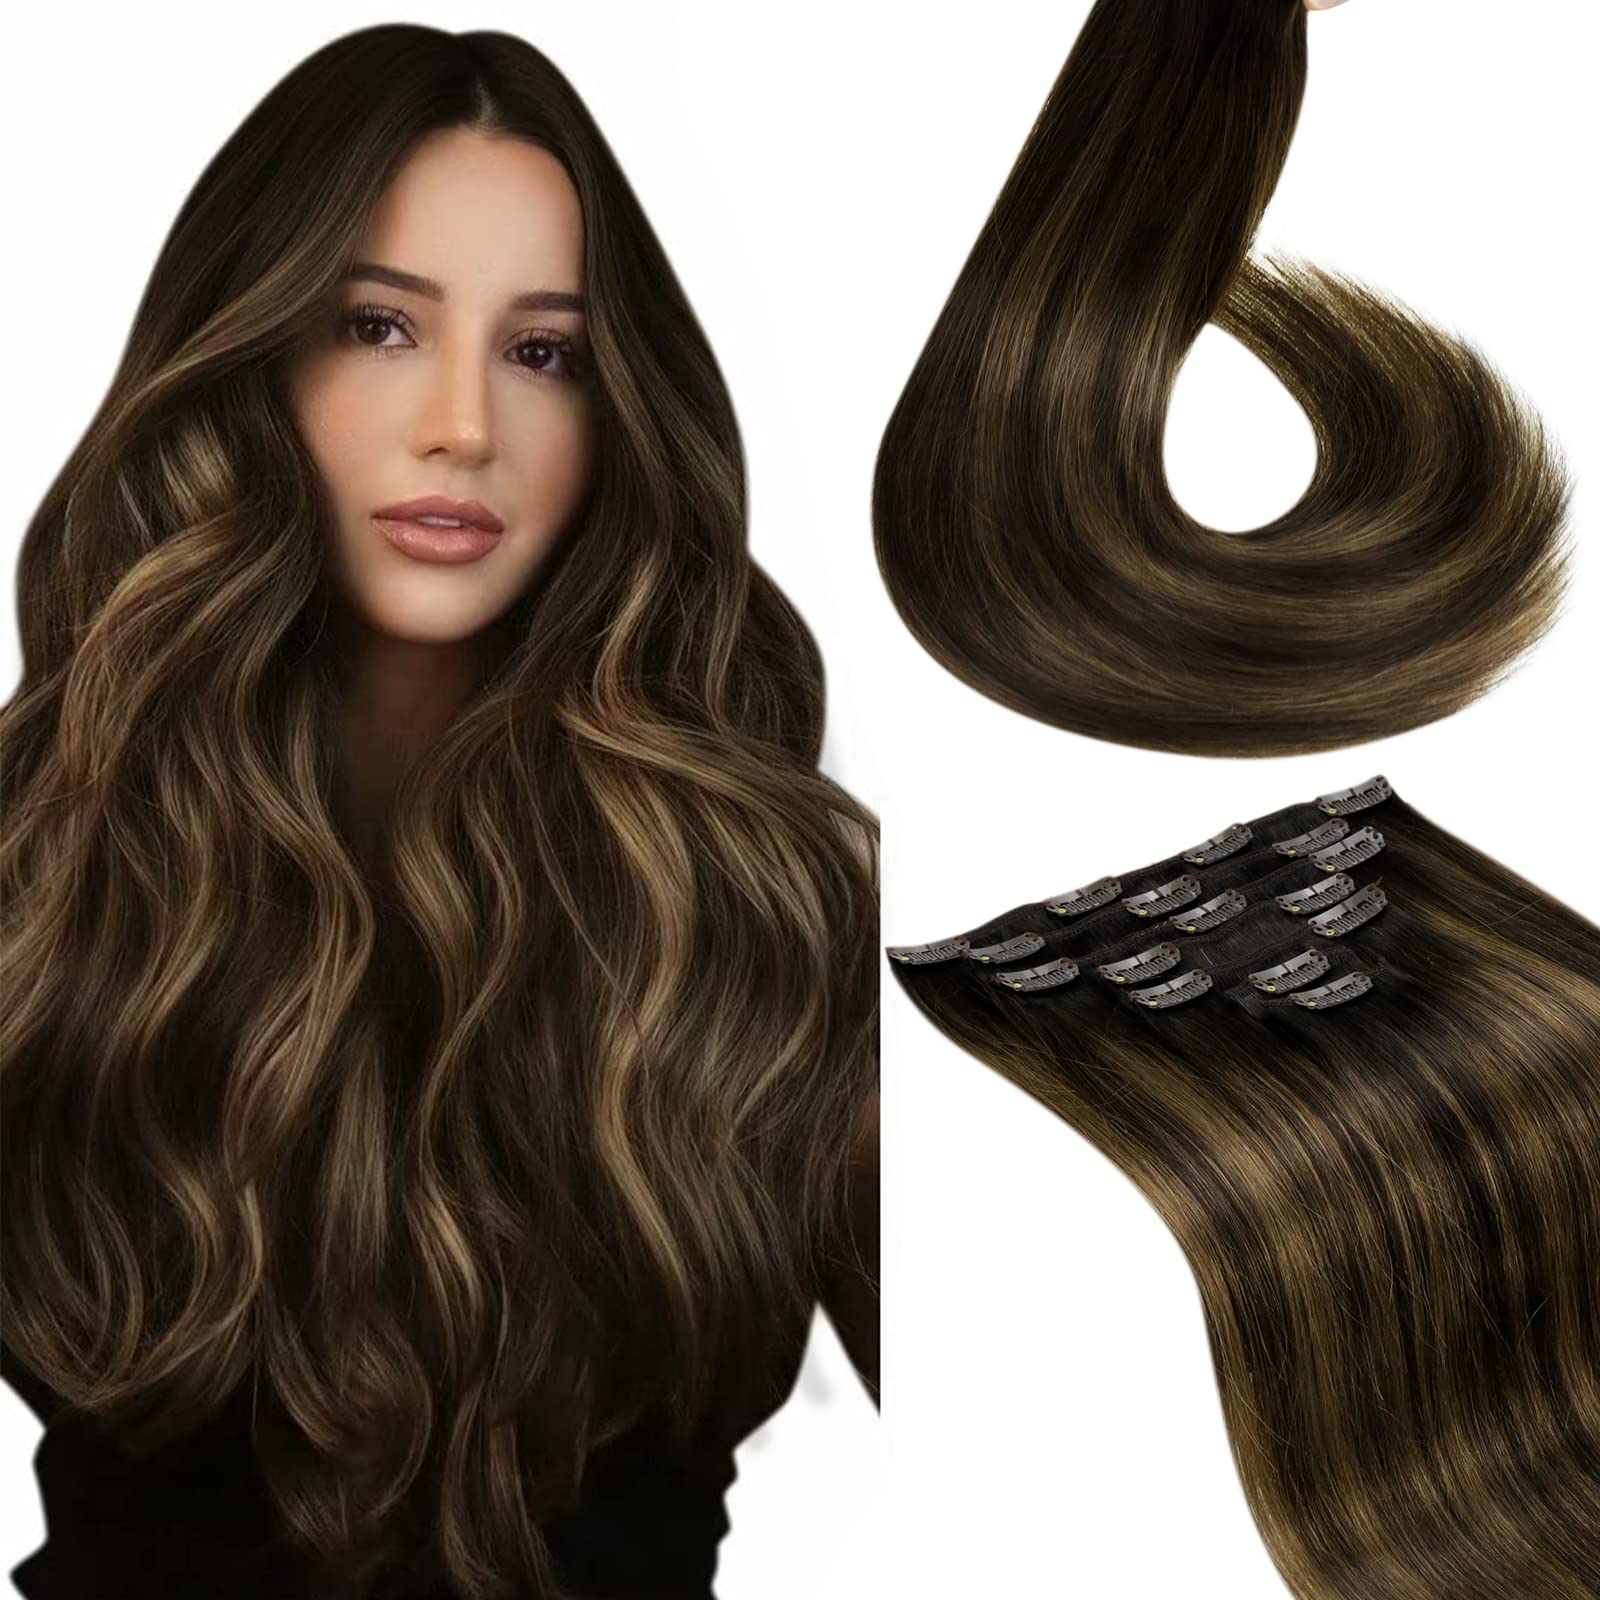 Laavoo Clip In Hair Extensions Balayage Real Human Hair Dark Brown Fading To Light Brown 18 Inch Hair Extensions Clip In Human H